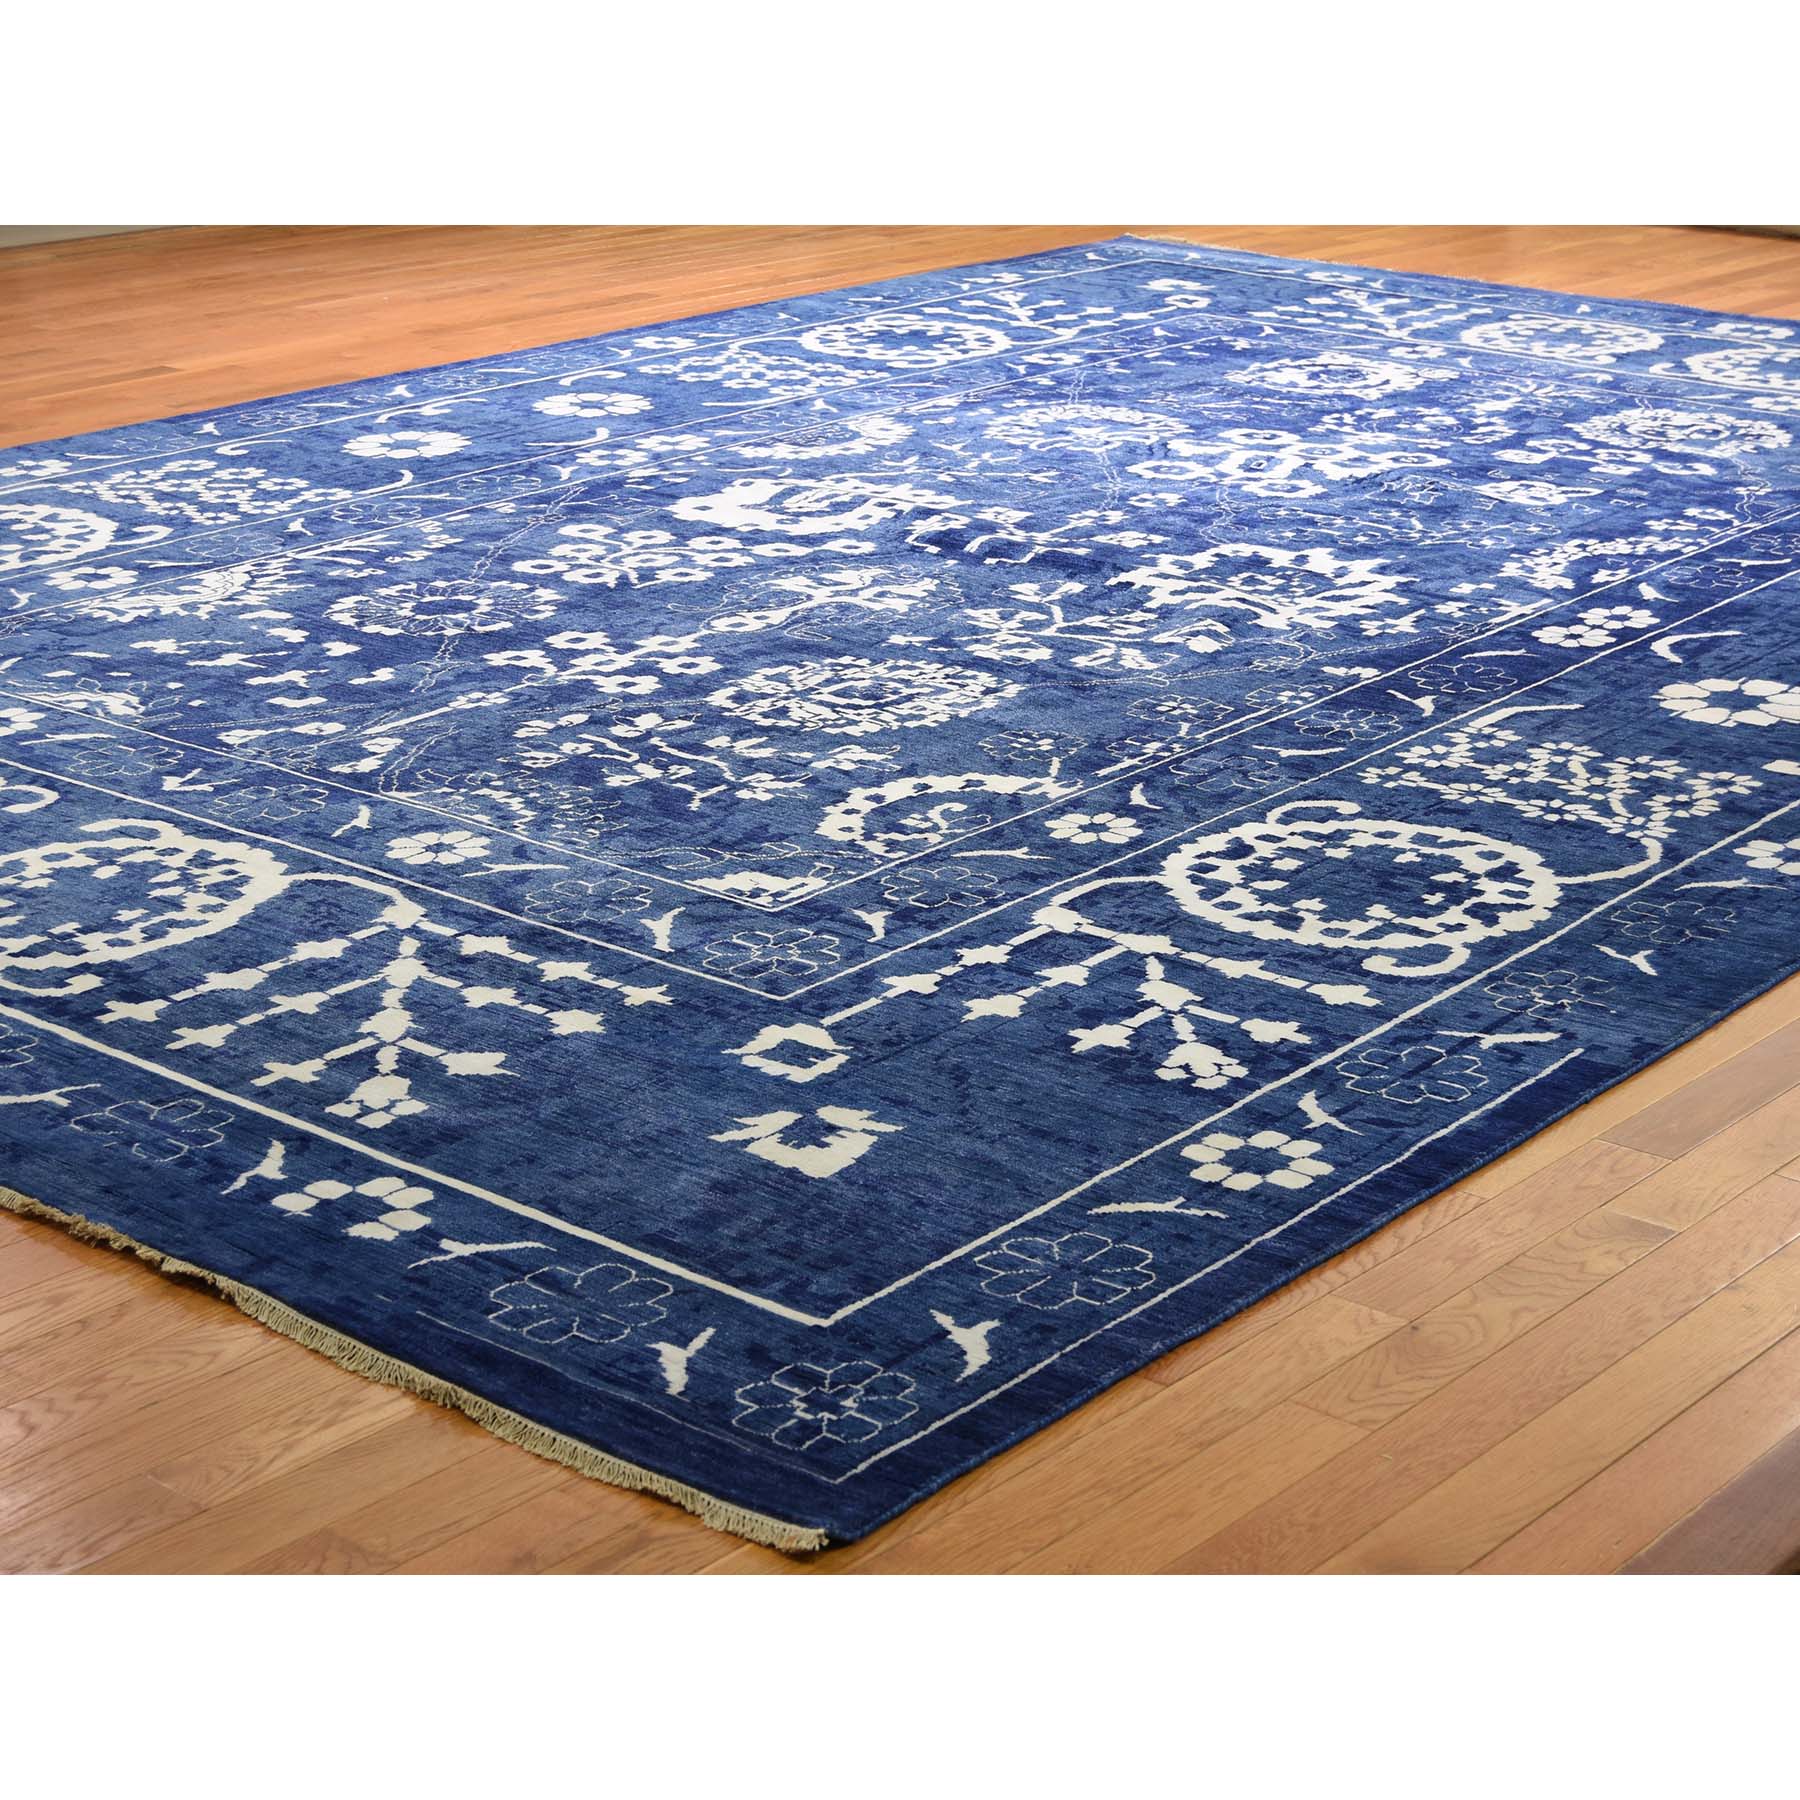 12-1 x18-2  Oversized Hand-Knotted Wool and Silk Tone on Tone Tabriz Oriental Rug 